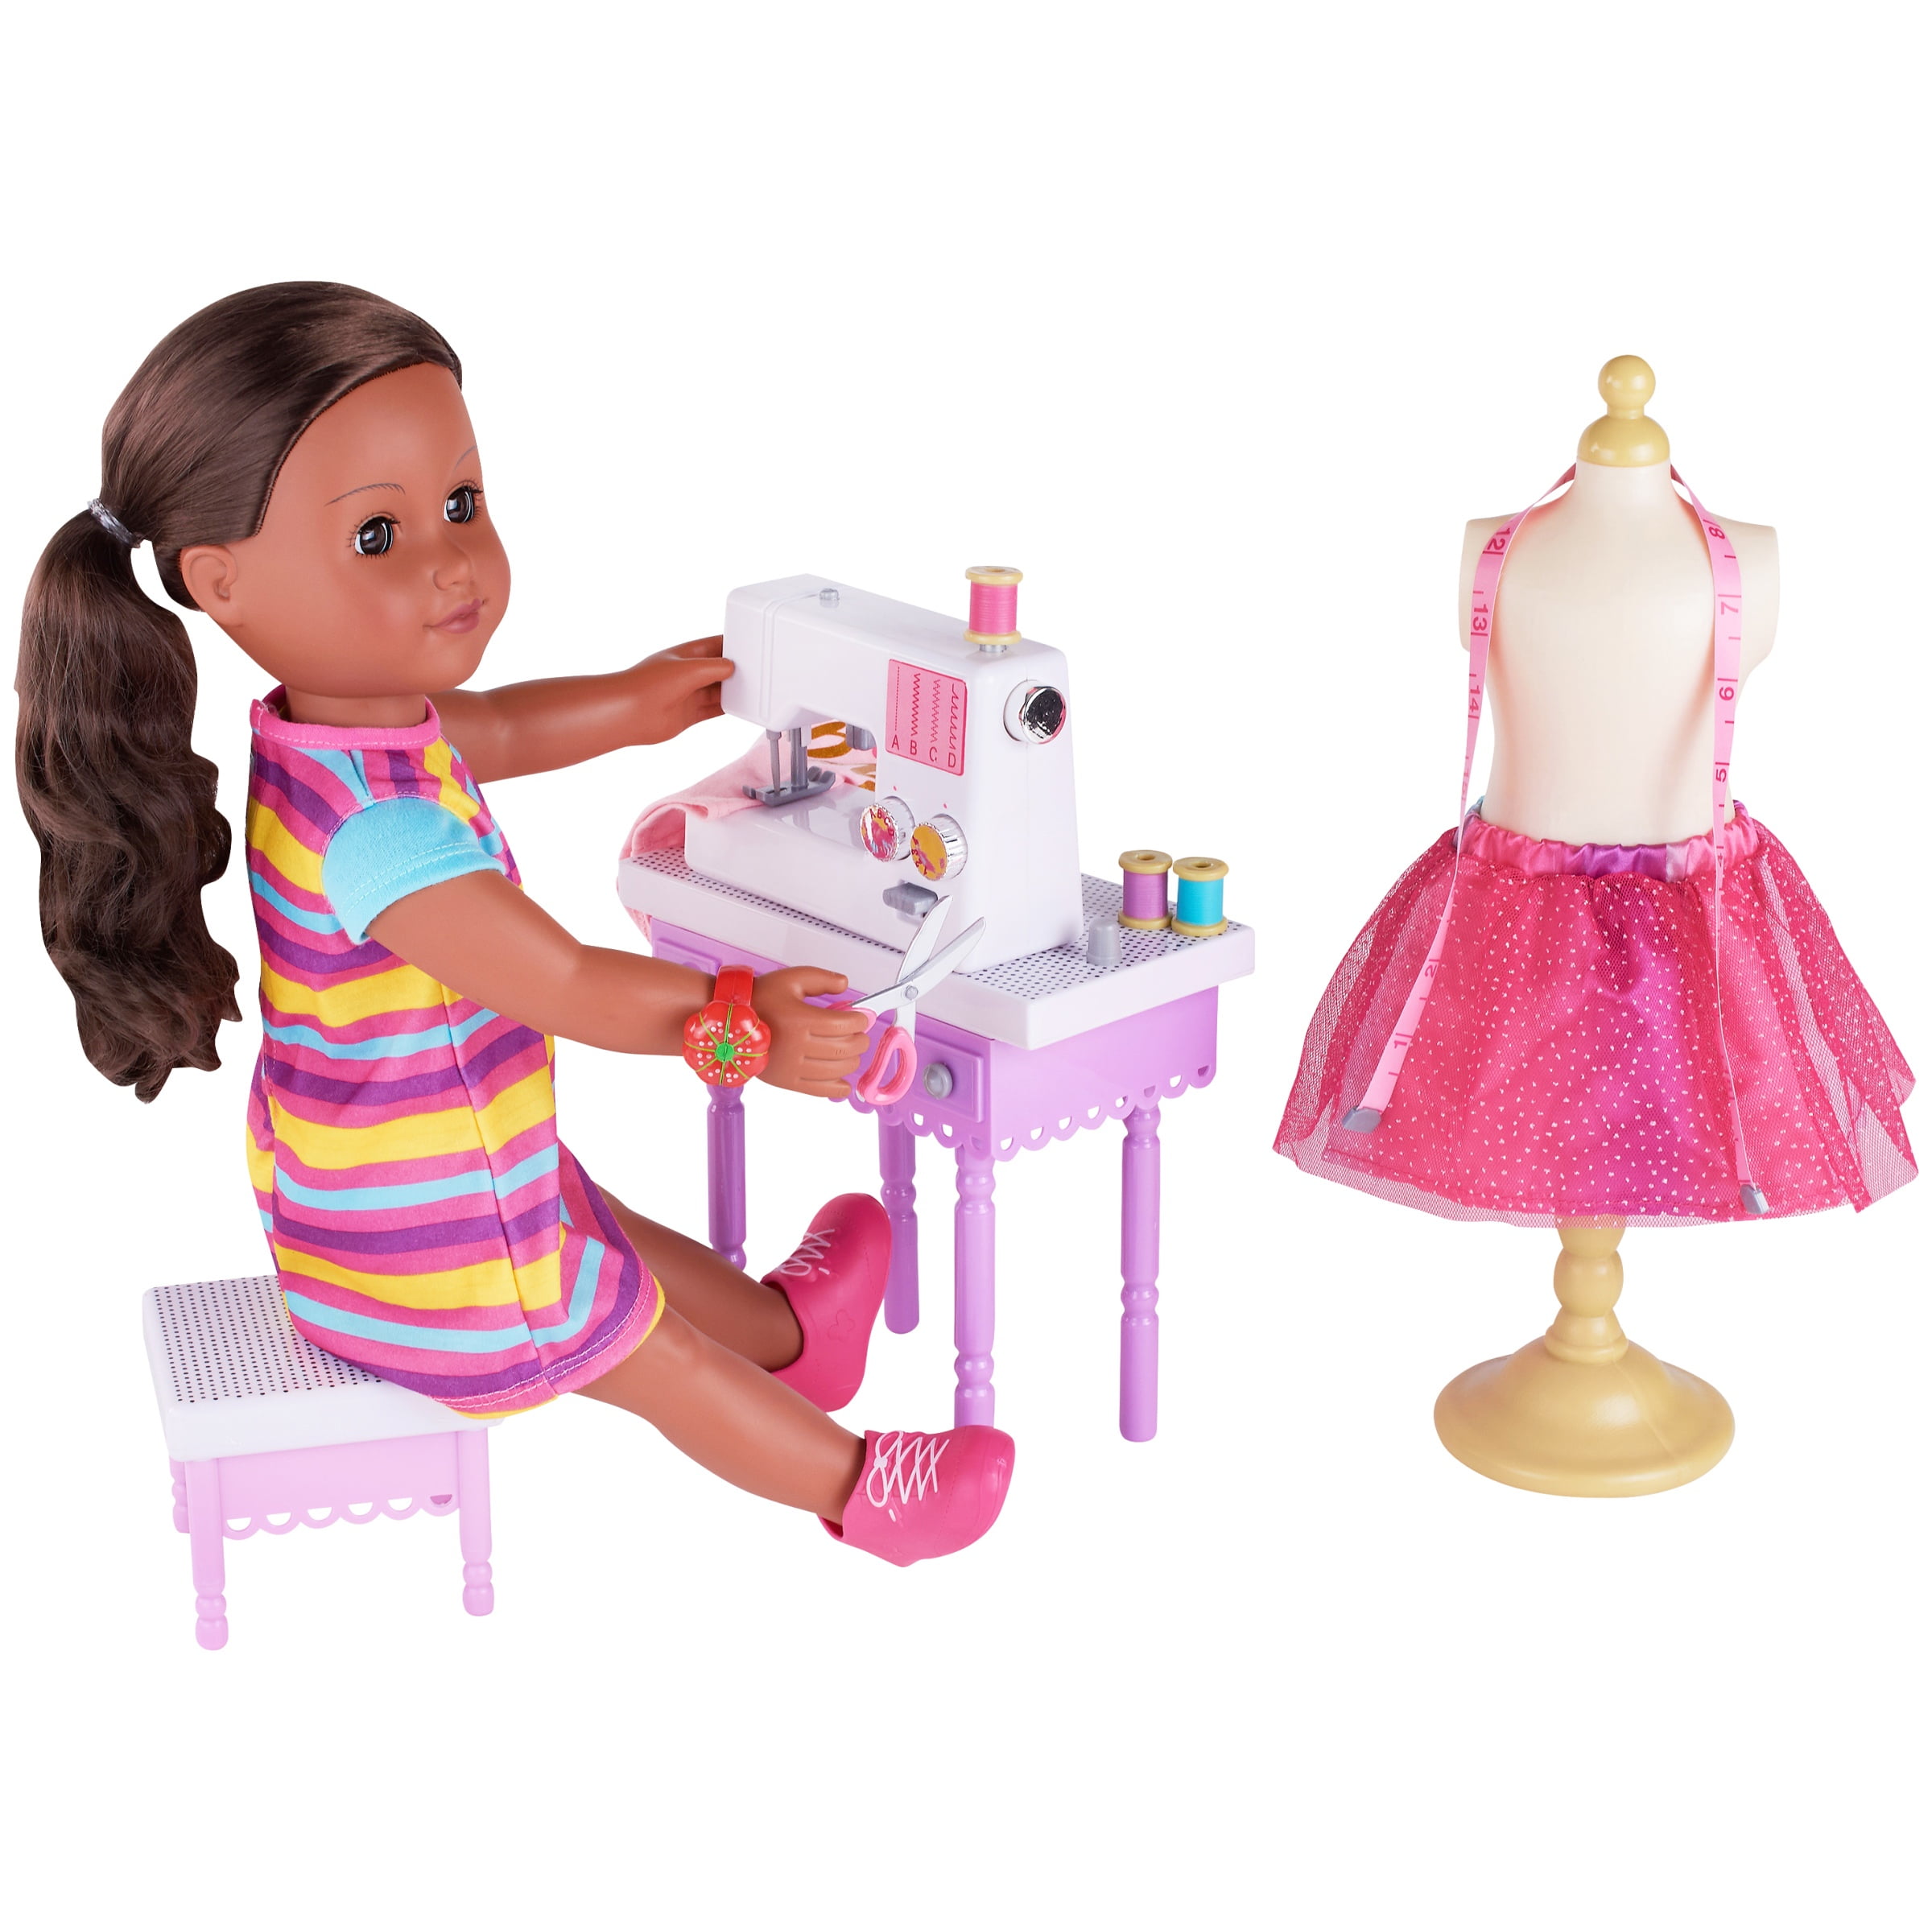 Fashion Designer Doll 3x Doll Dresses And Small Accessories 11.5 Fashion Dress-up Doll Christmas Birthday Gifts for Girls Aged 3 4 5 6 7 Tailor Doll Playset with Sewing Machine and Chair